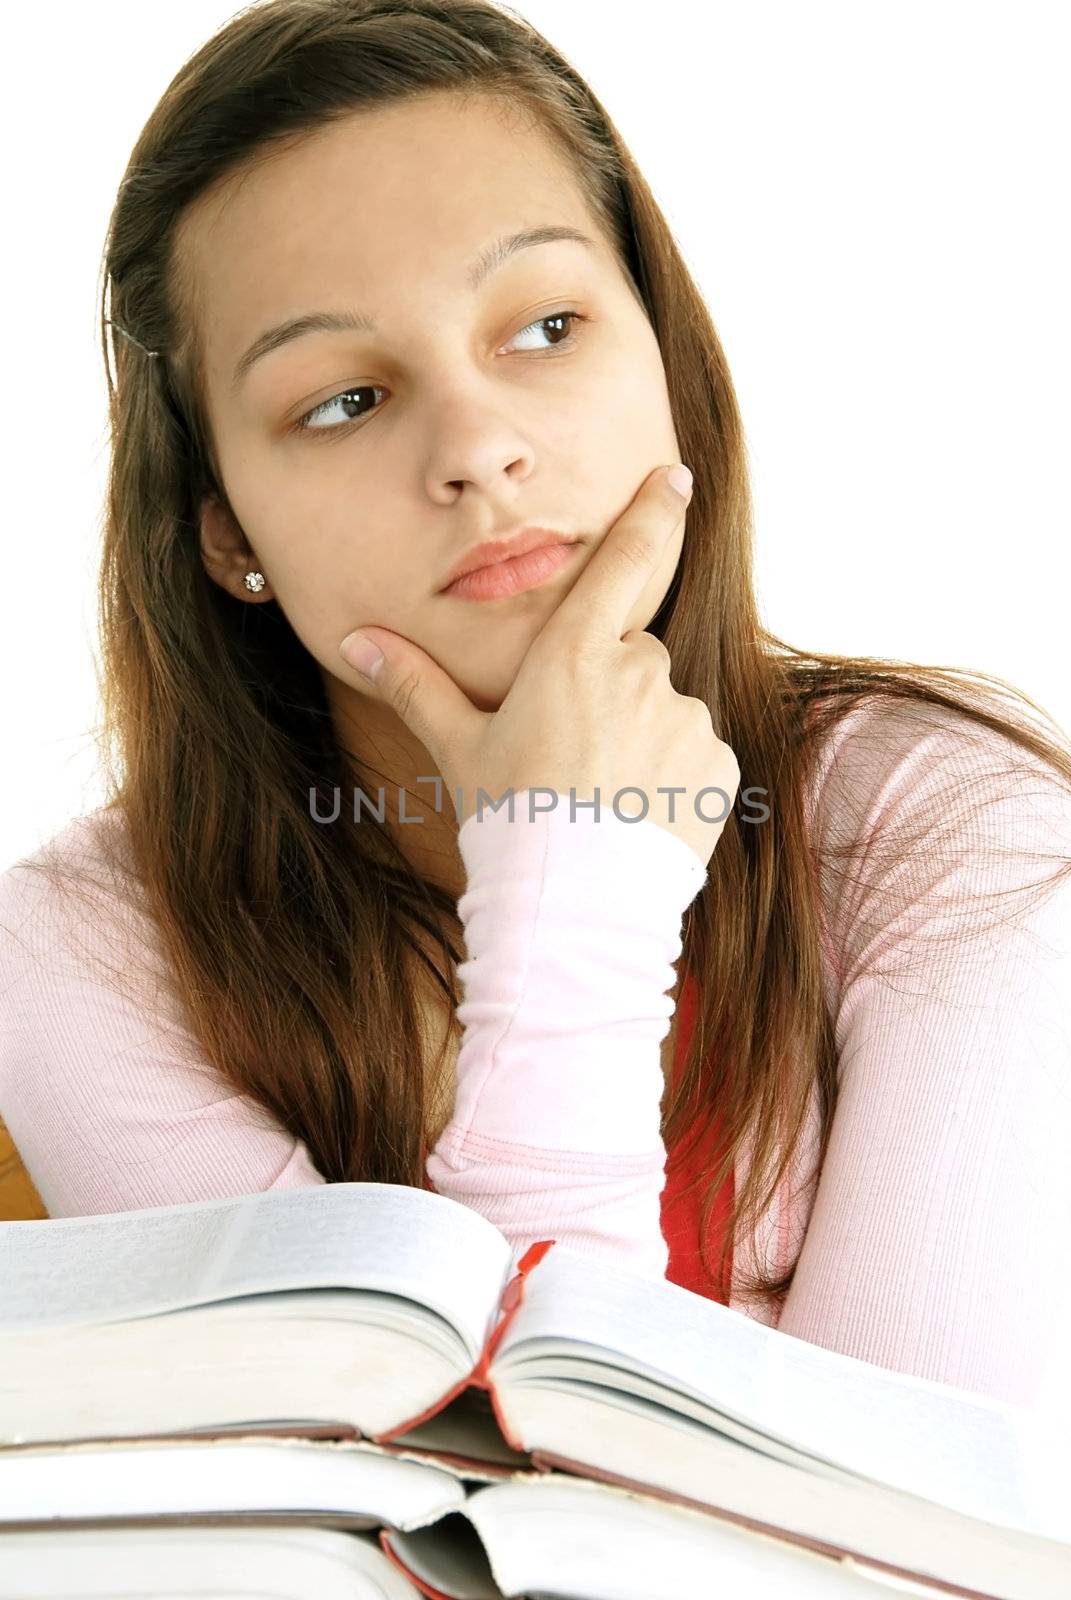 teenage girl portrait with opened books, thinking